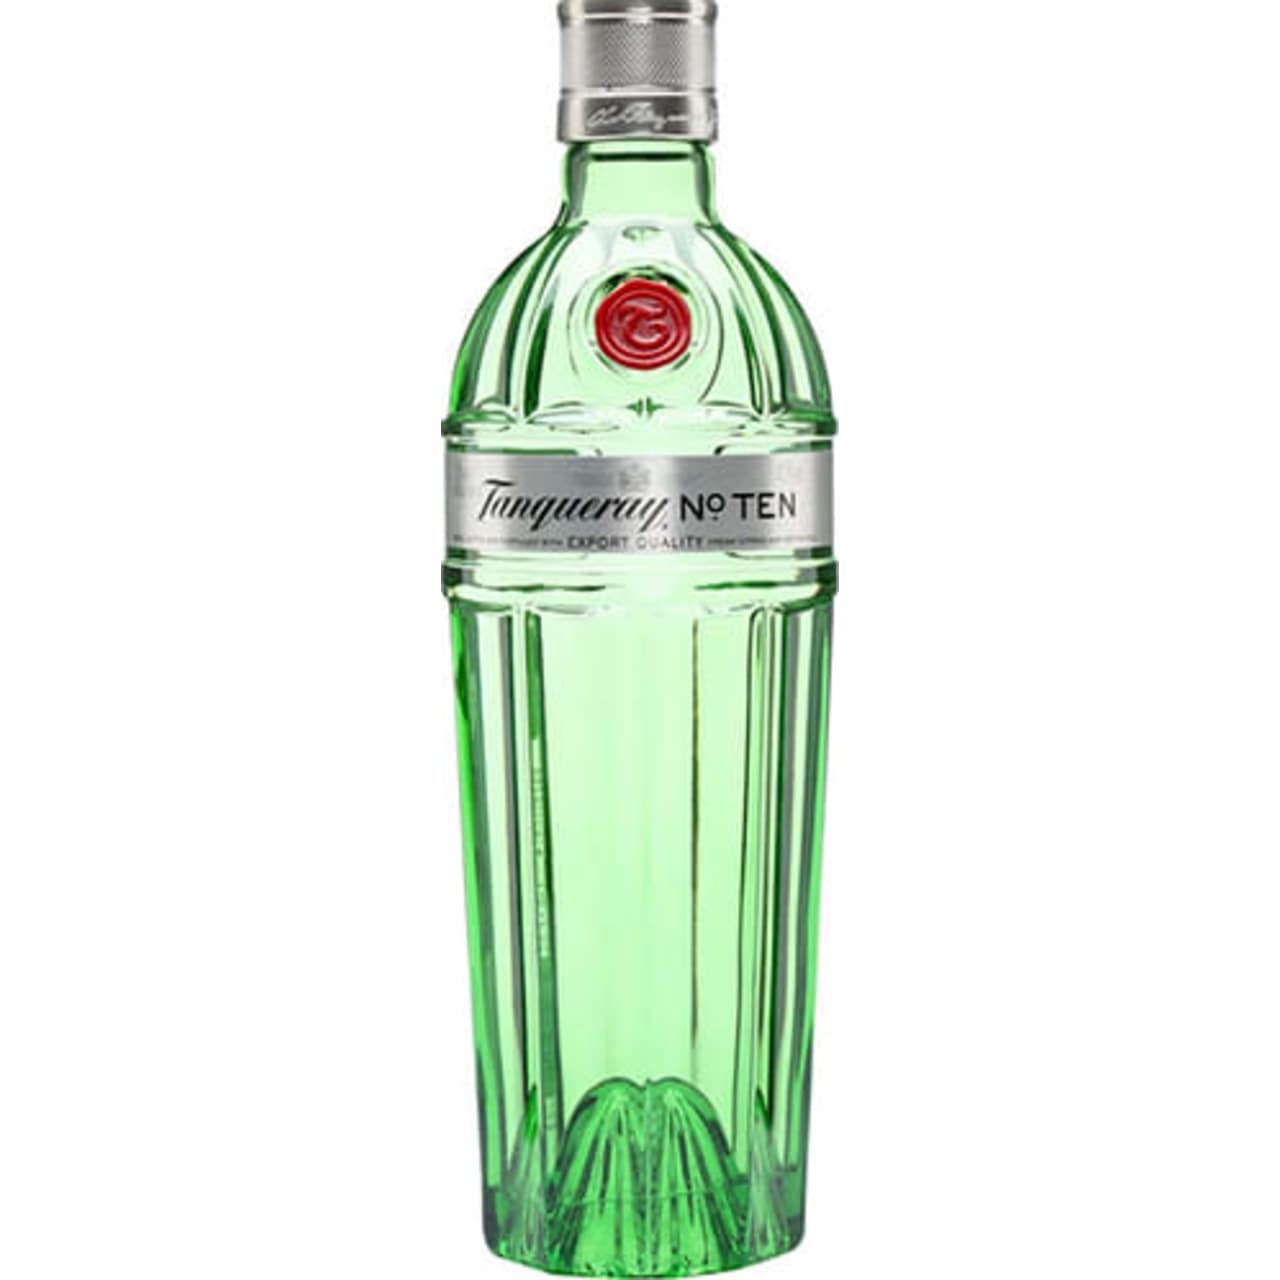 Tanqueray No. Ten Gin is distilled four times with Tanqueray's standard gin botanicals of refreshing juniper, peppery coriander, aromatic angelica and sweet liquorice.